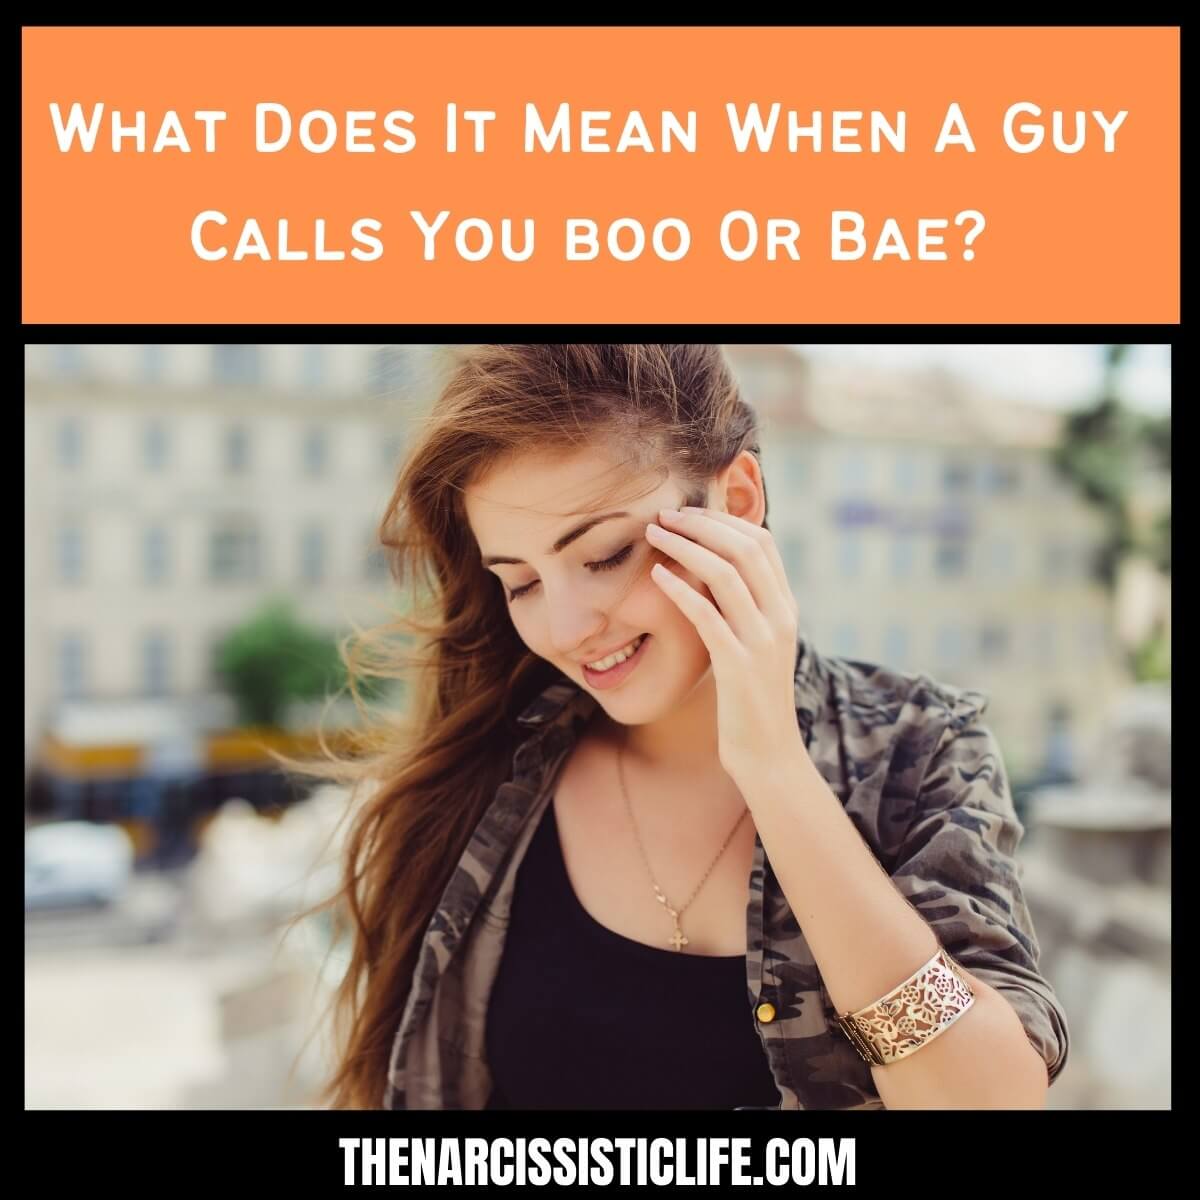 How To Respond When Someone Calls You Boo